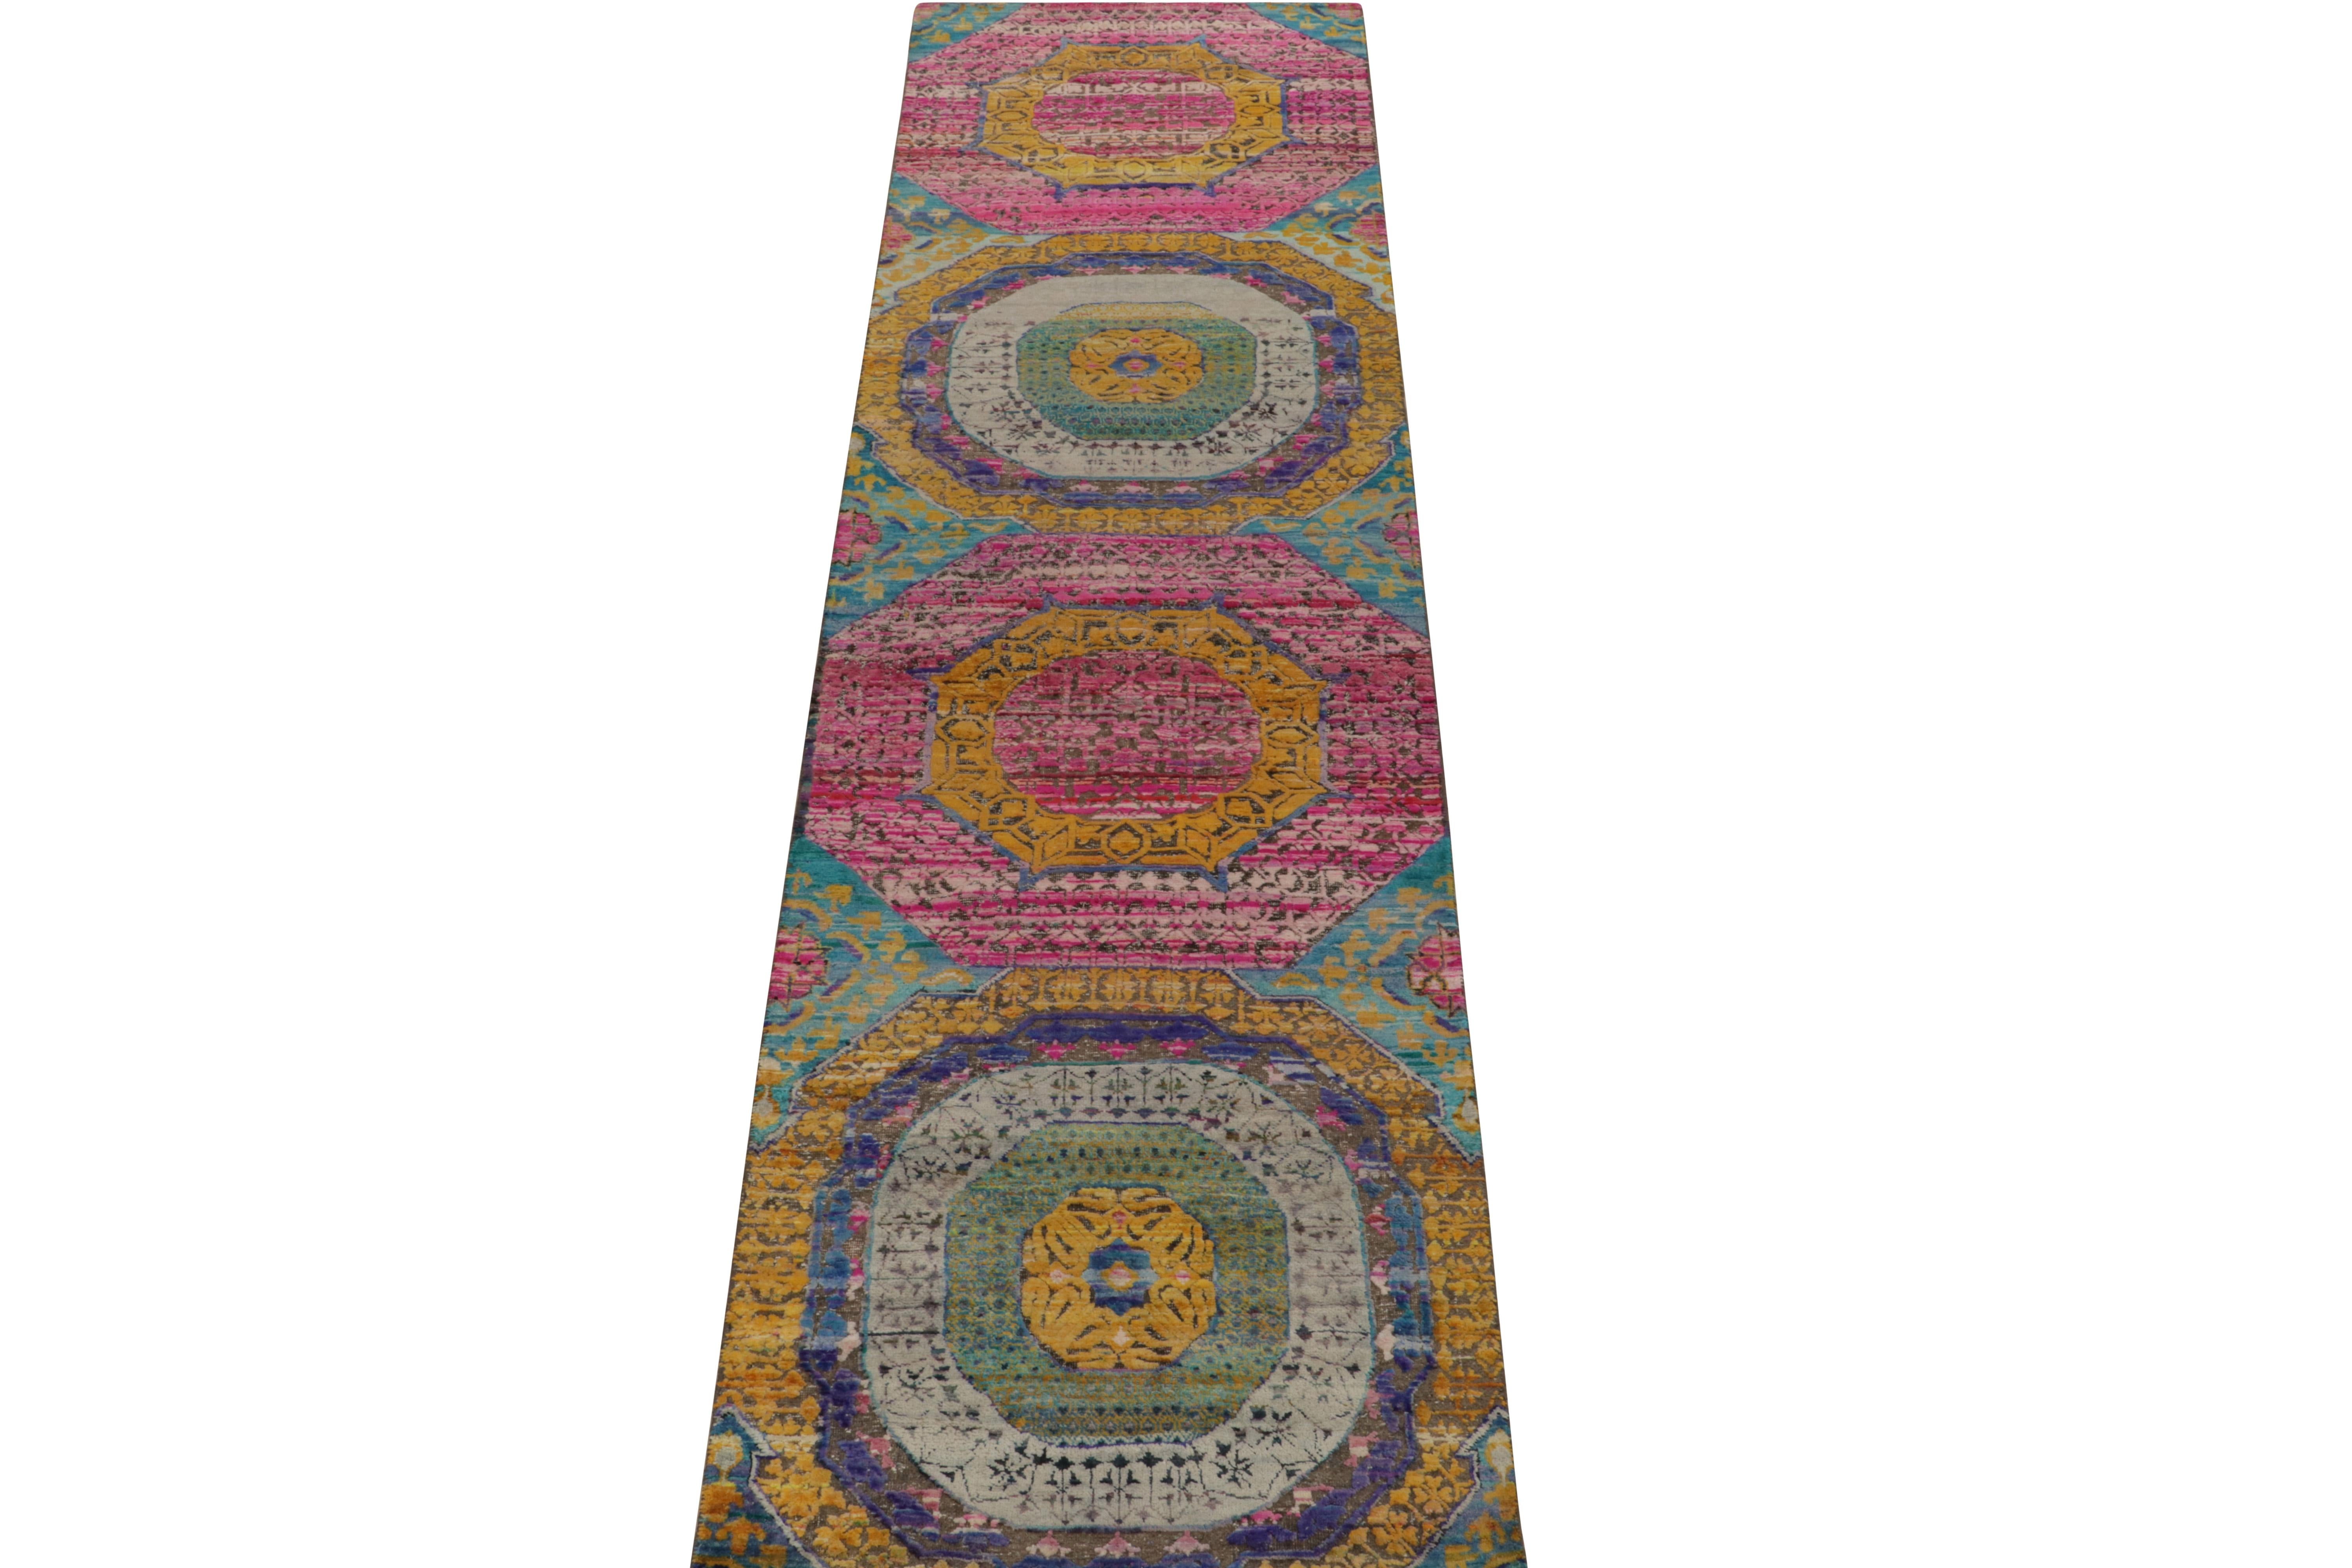 Indian Rug & Kilim’s 17th Century Classic Style Runner in Gold, Pink & Blue Medallions For Sale